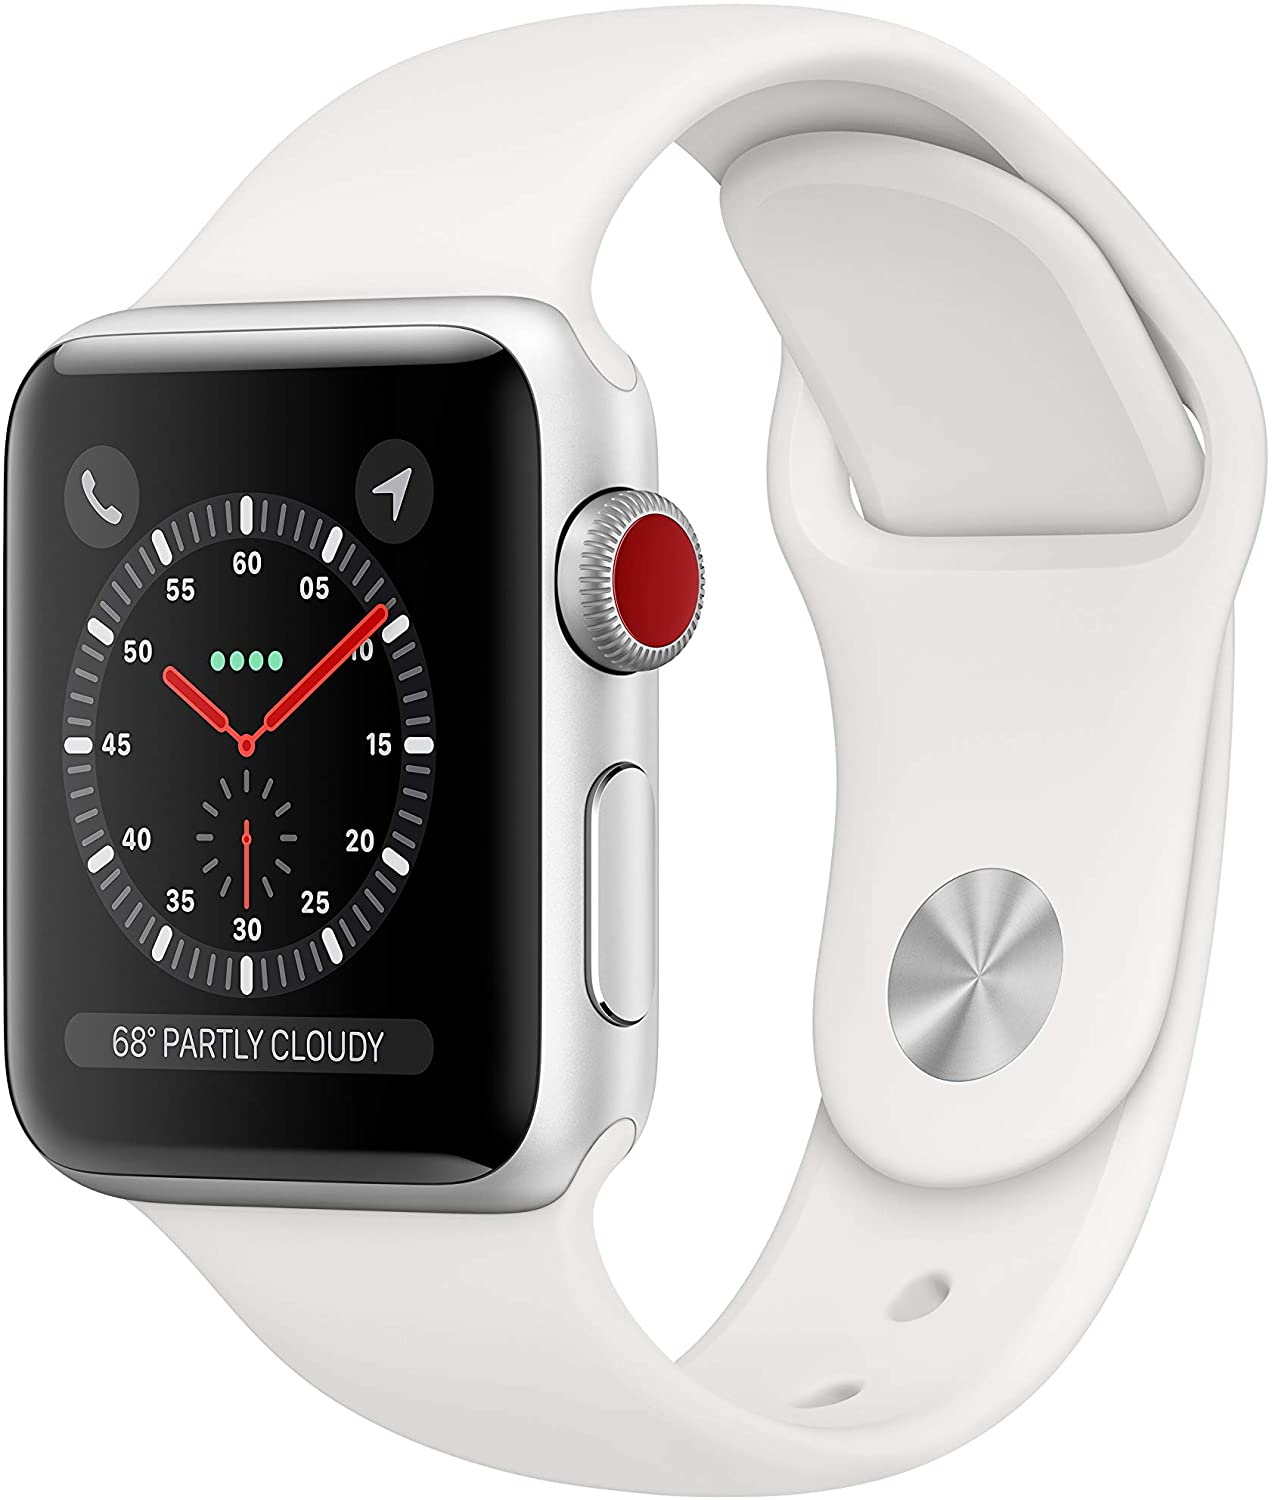 Apple Watch Series 3 (GPS + Cellular, 38mm) - Silver